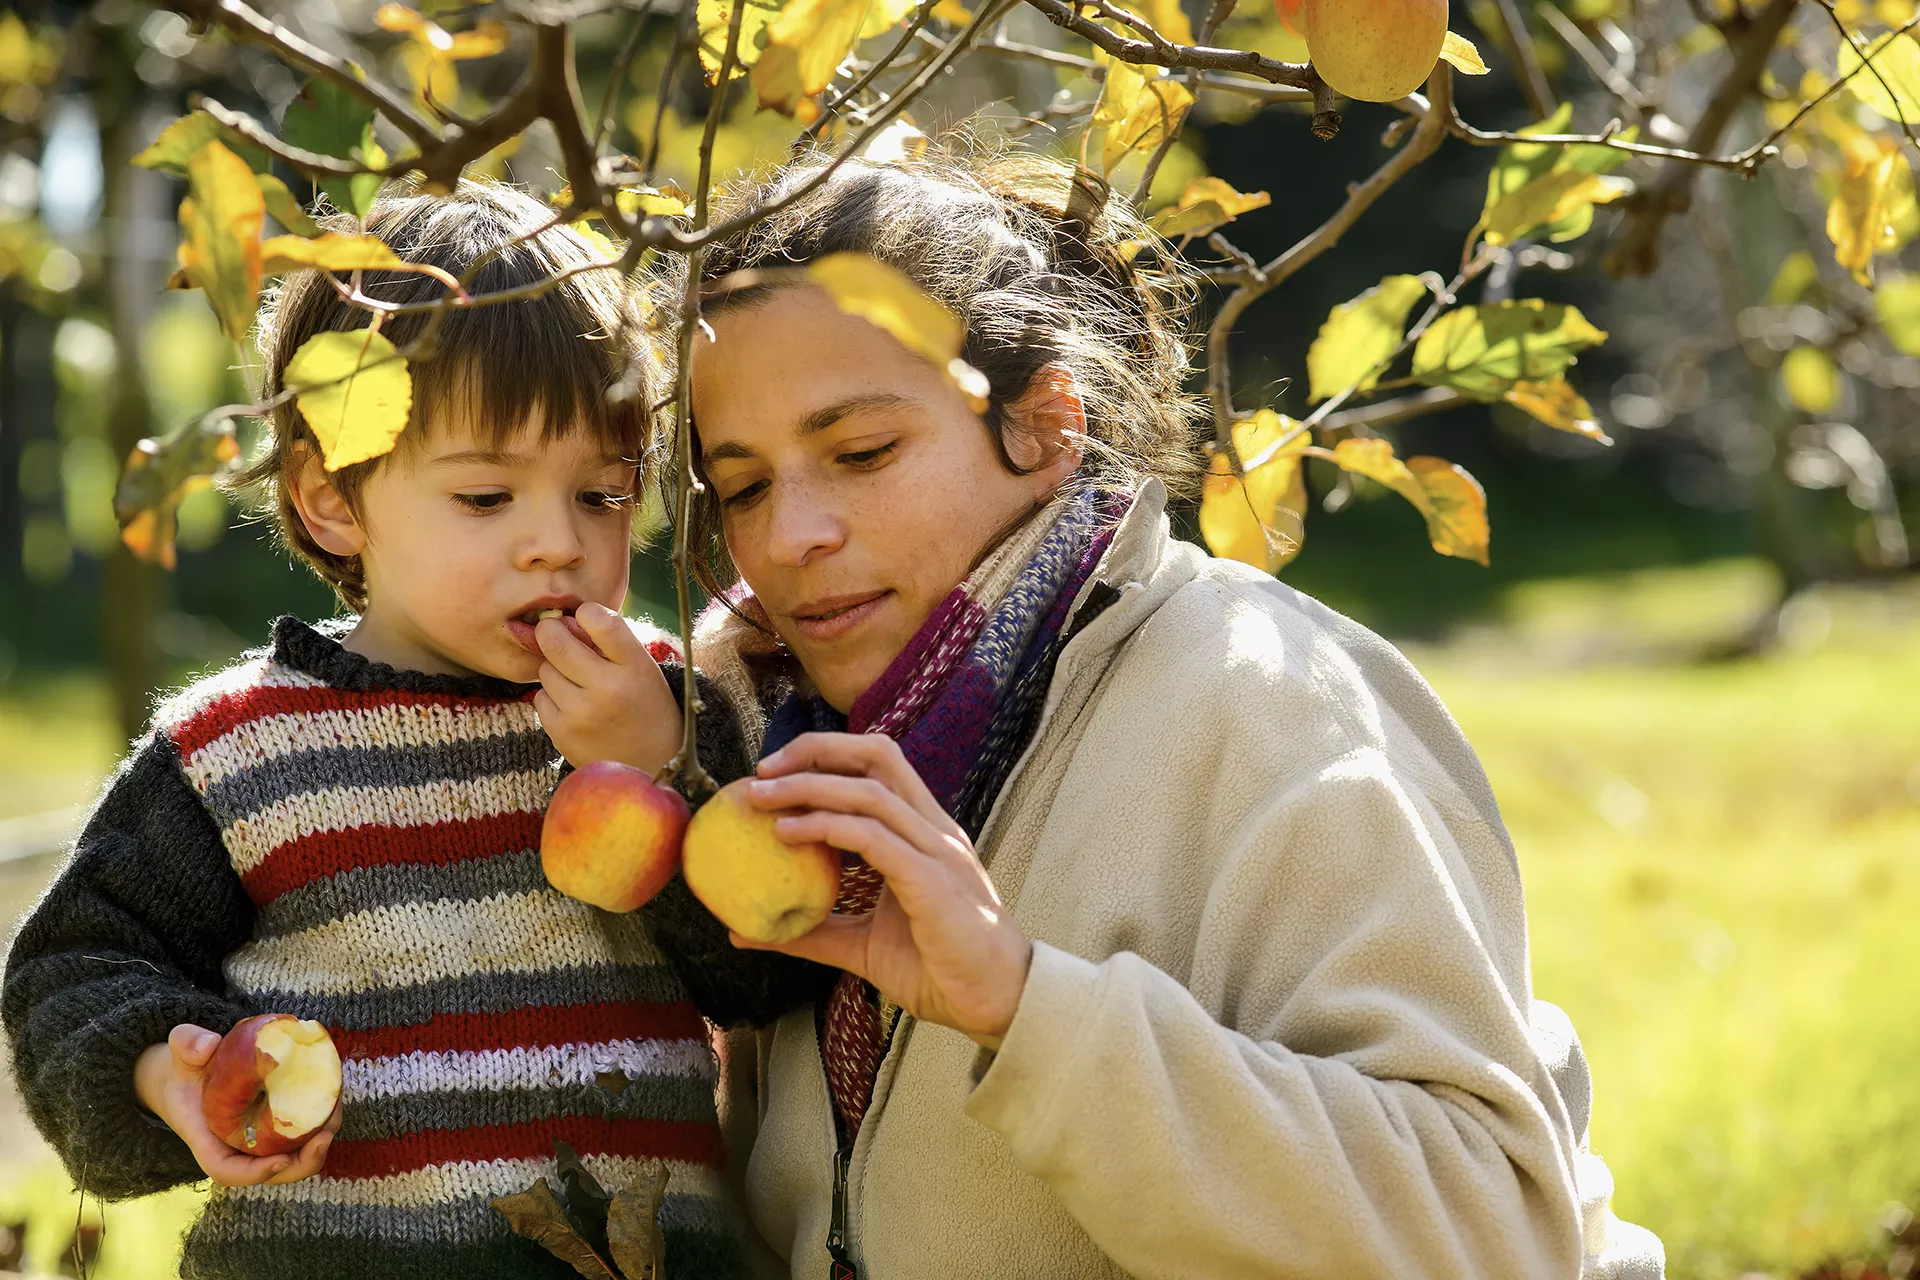 Joaquín, 2, helps his mother, Rosina, pick apples in the family's orchard at their home in a rural area of the department of San José, Uruguay.